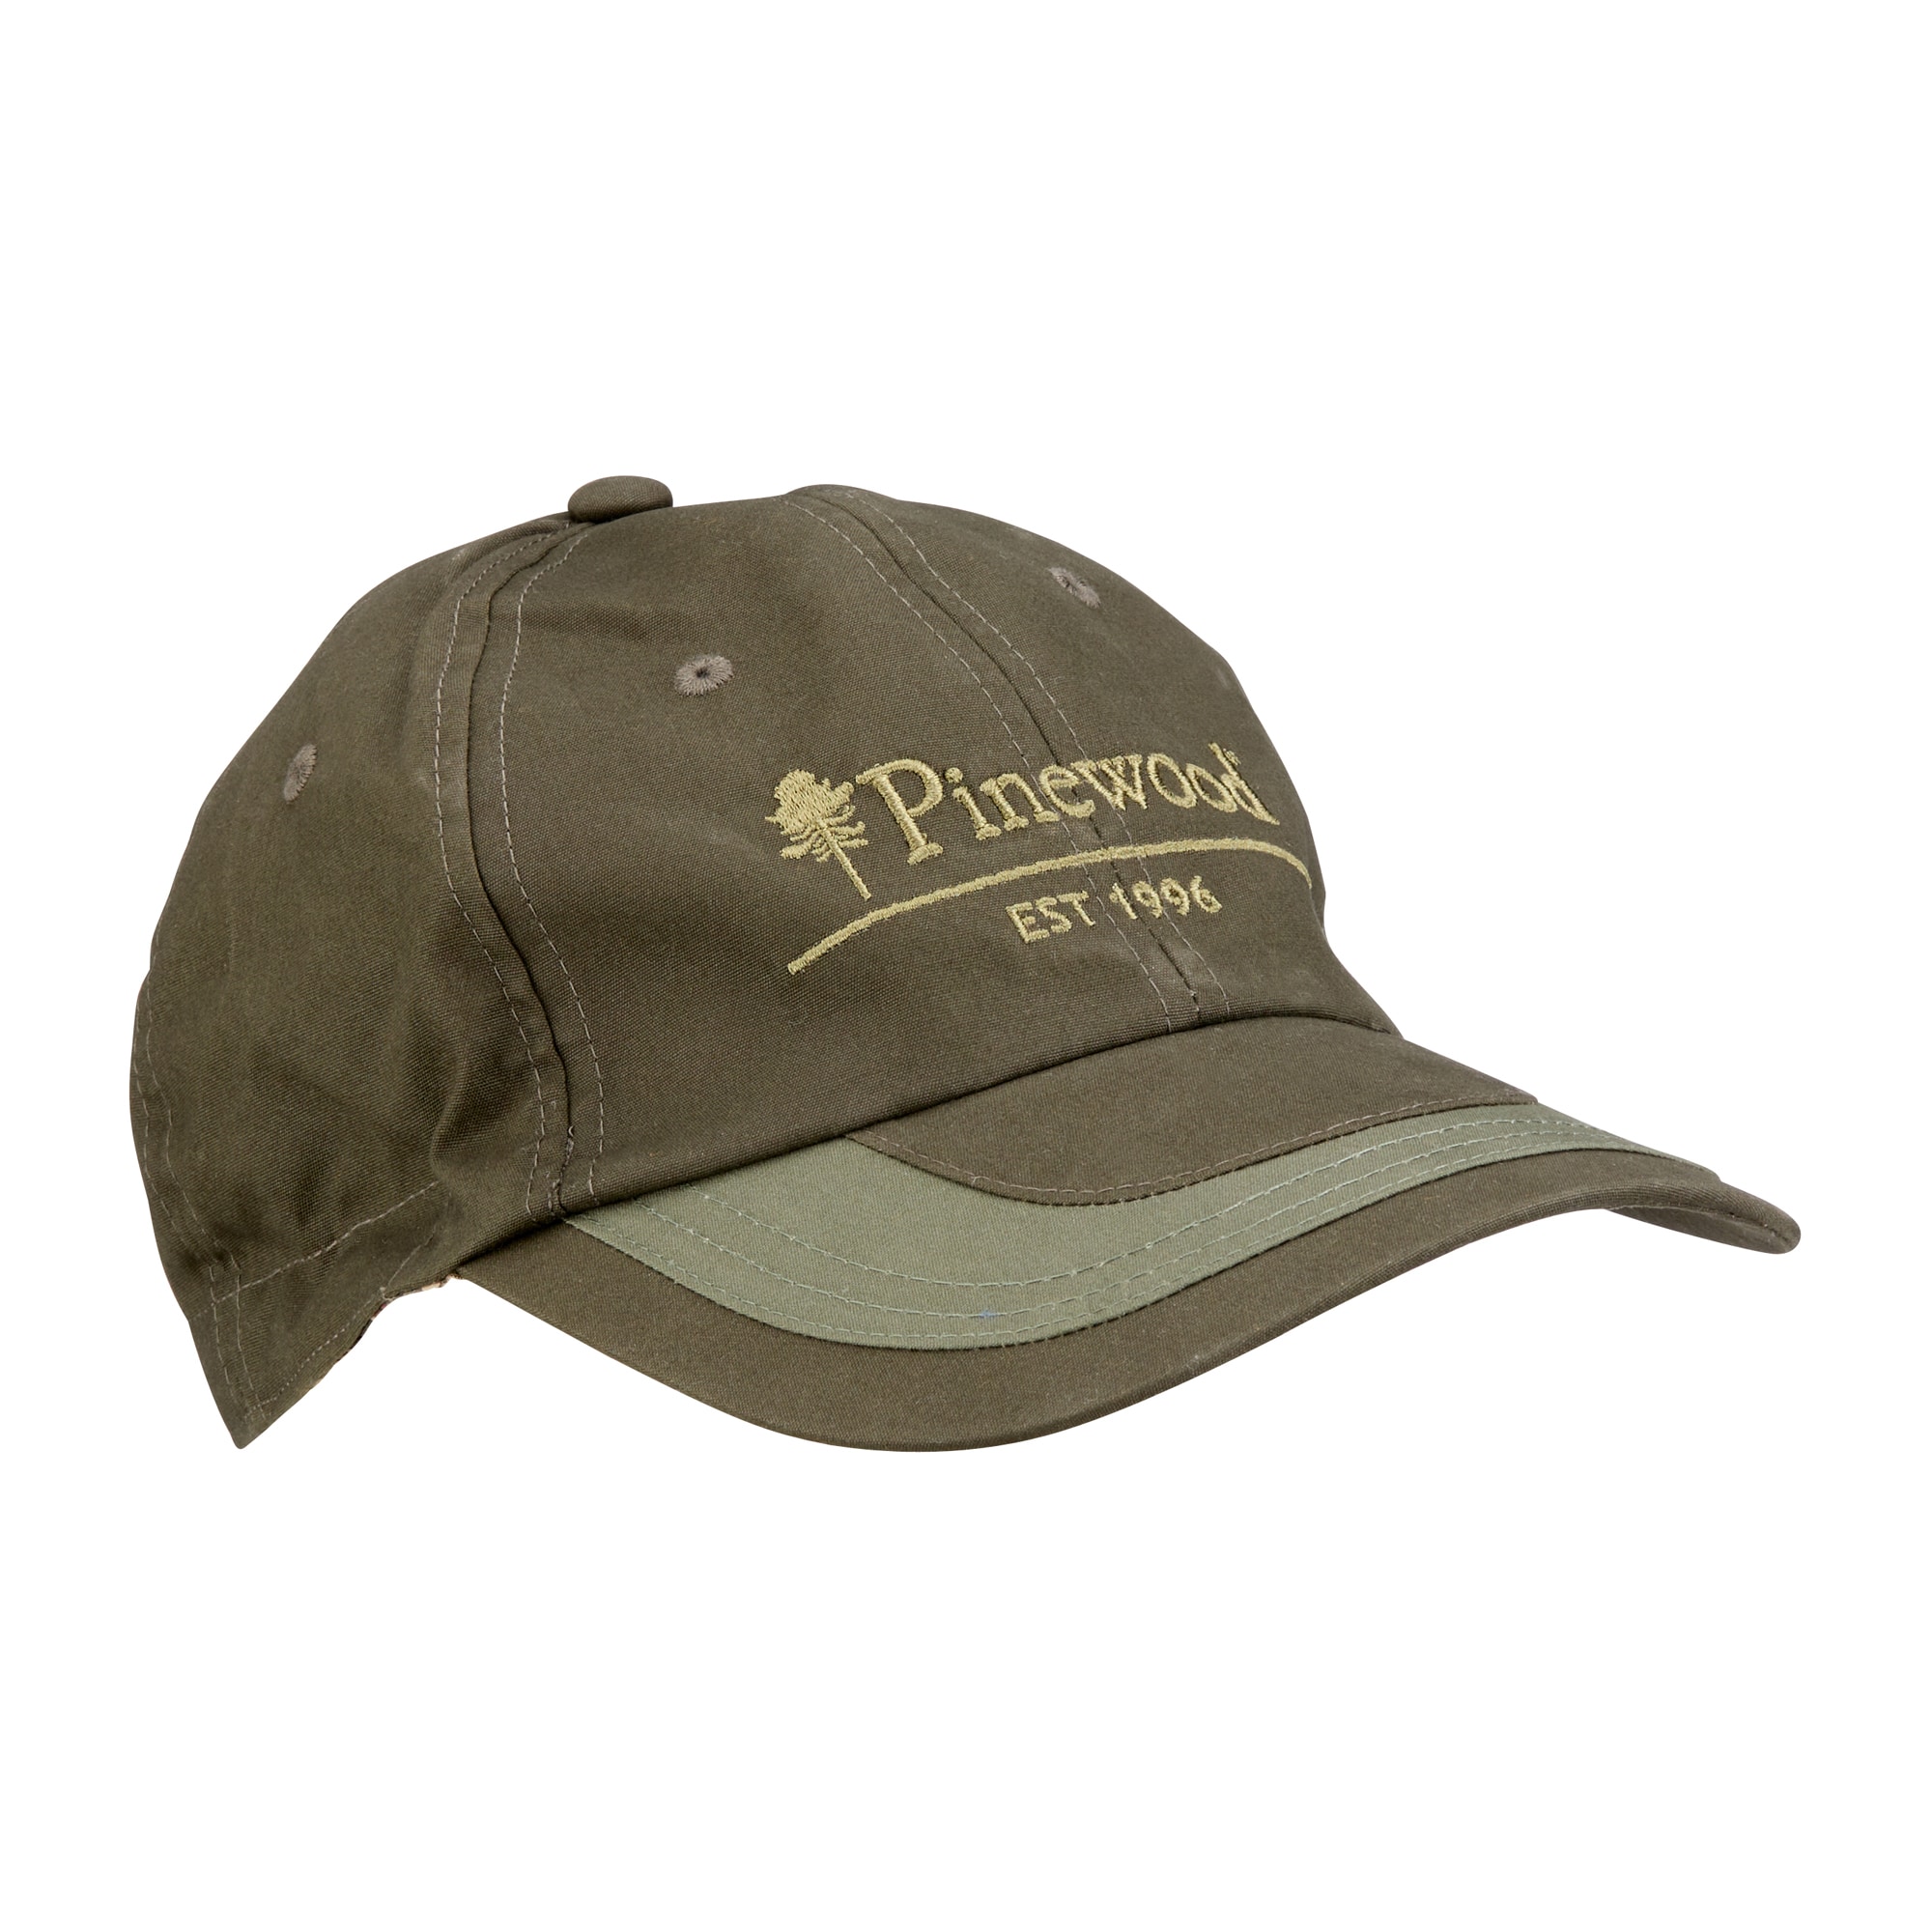 the Pinewood Cap Extreme by ASMC